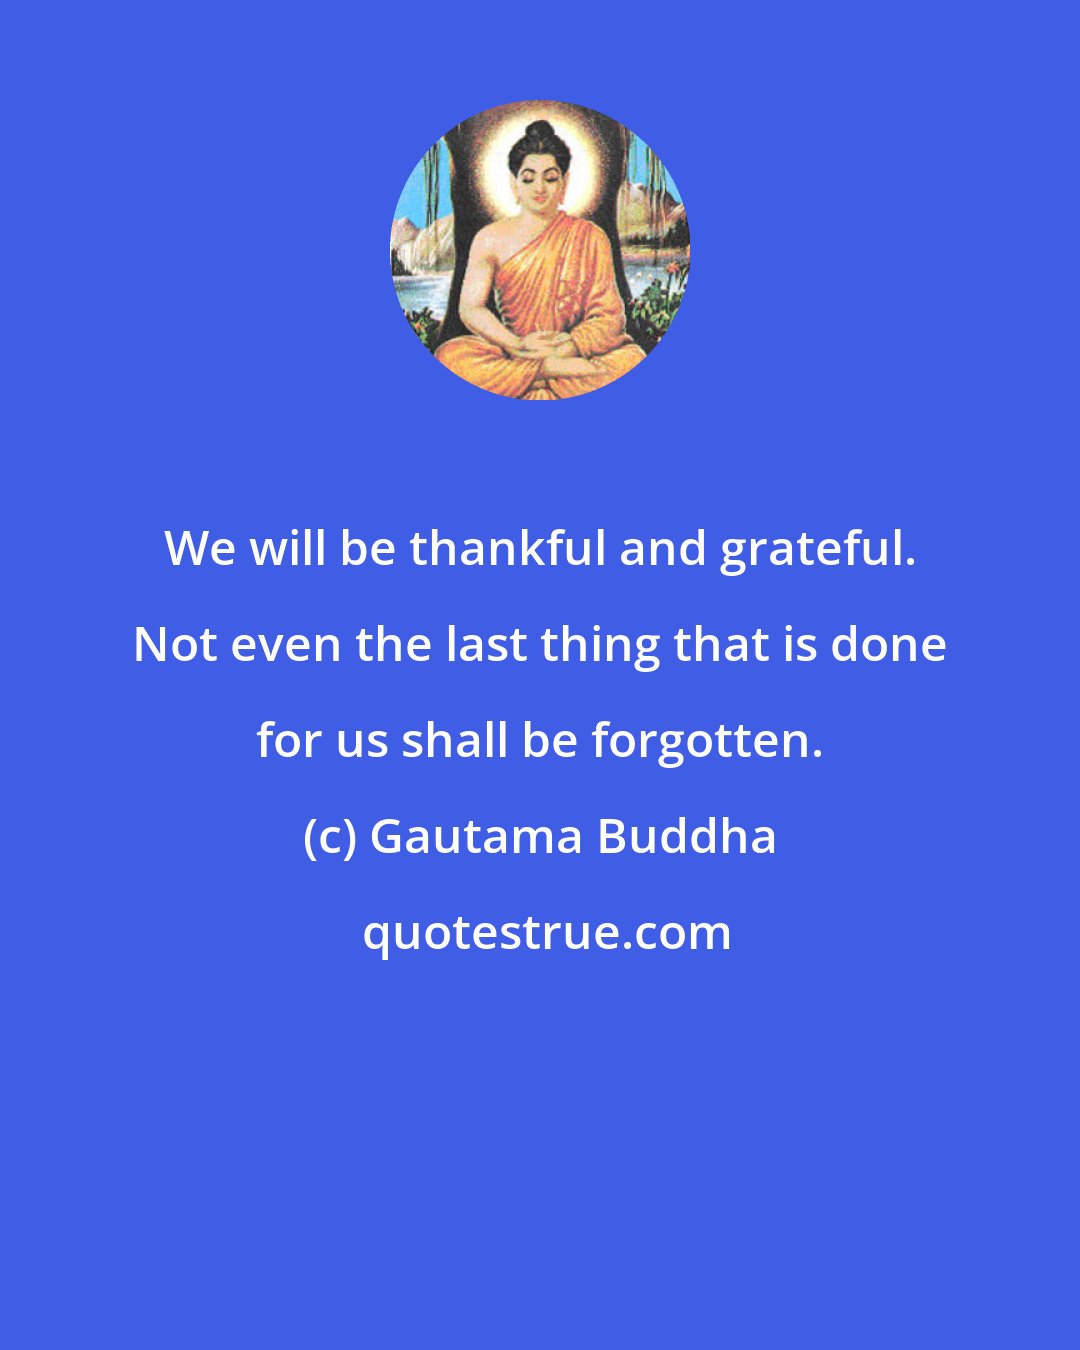 Gautama Buddha: We will be thankful and grateful. Not even the last thing that is done for us shall be forgotten.